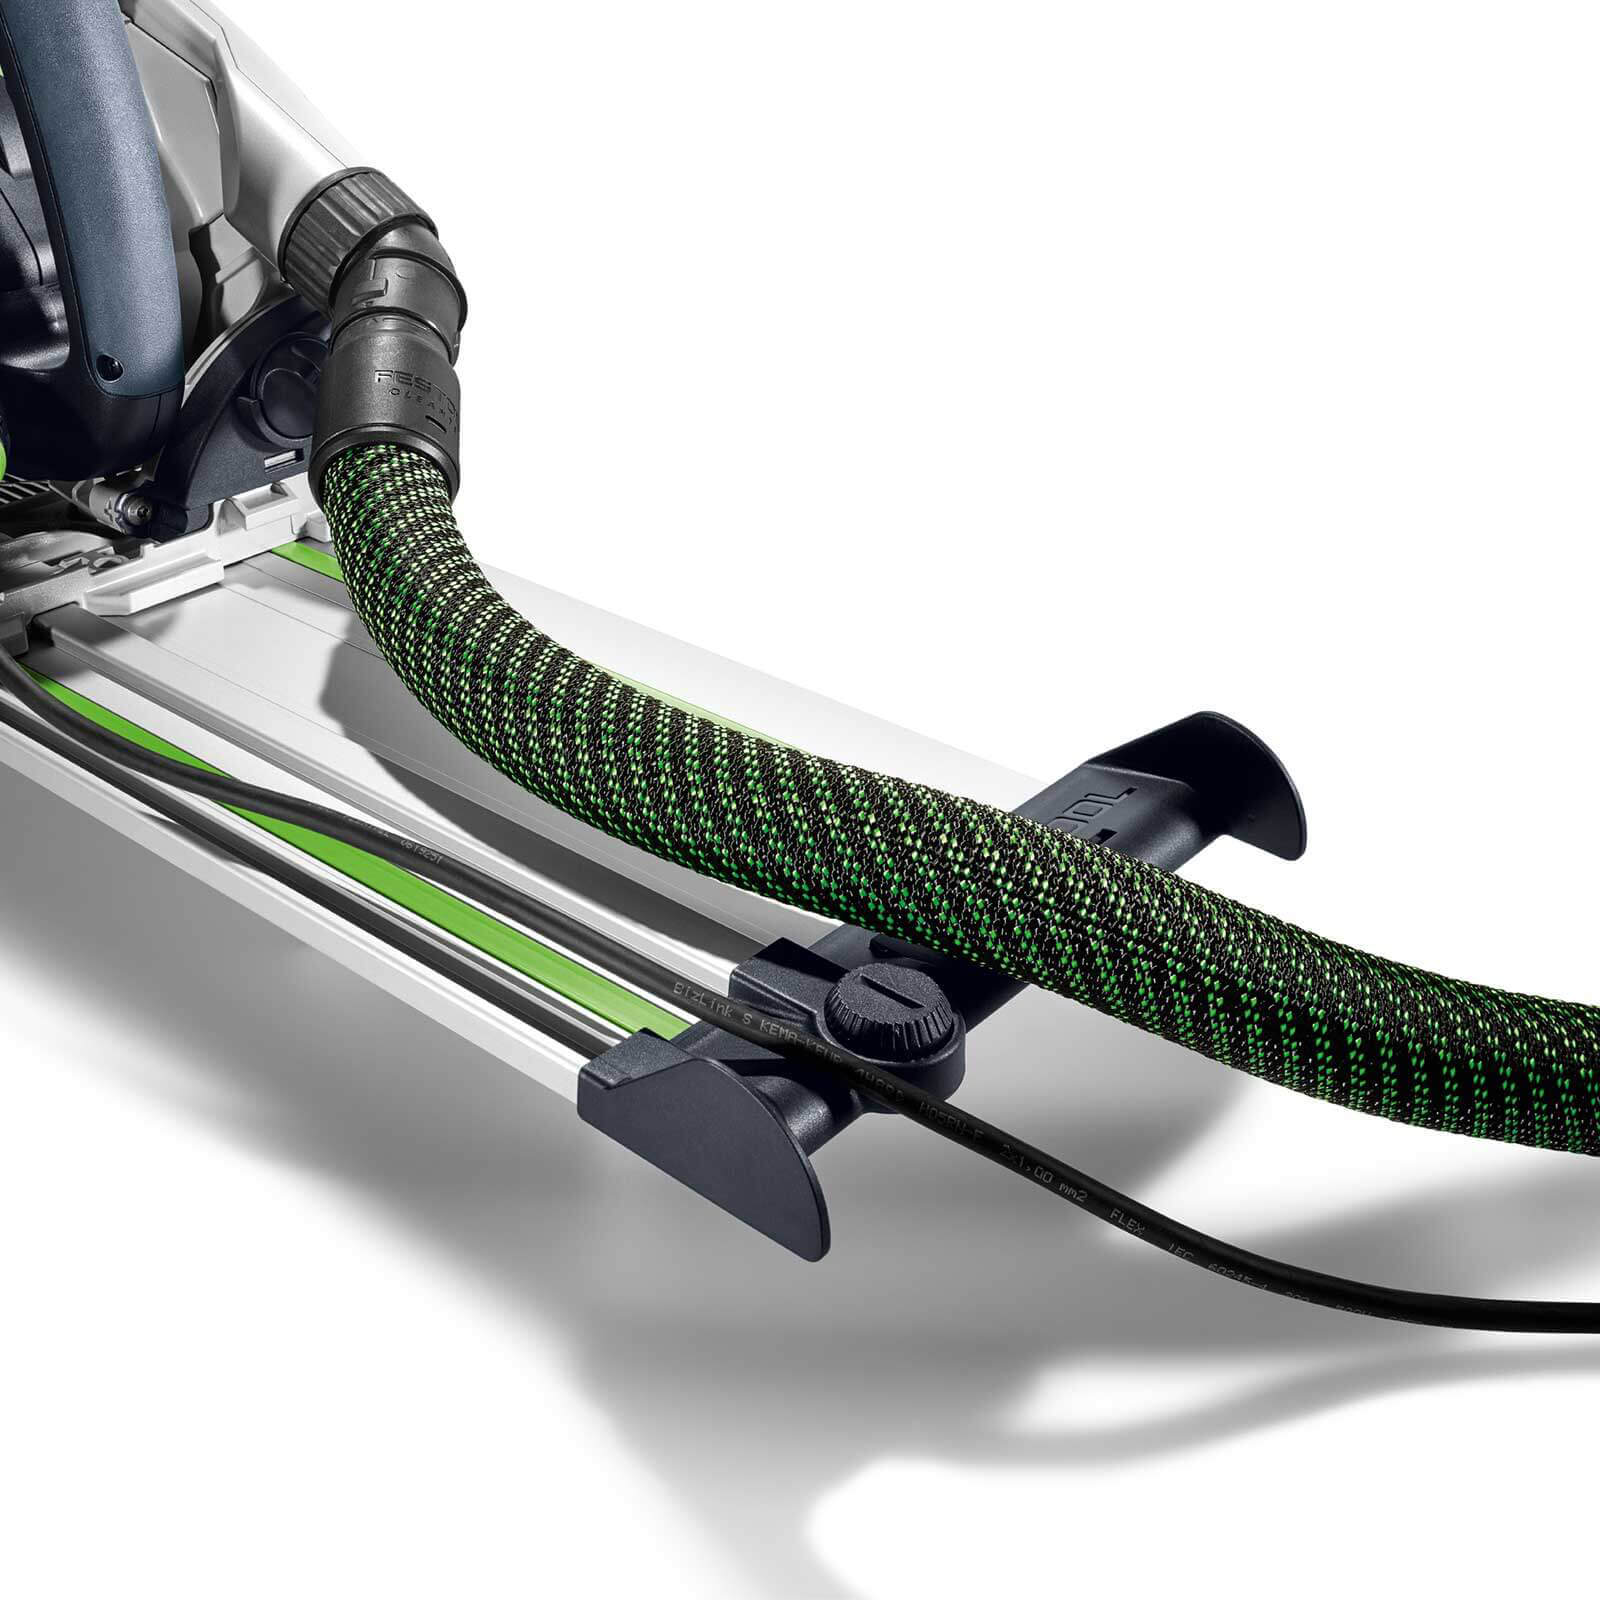 Photo of Festool Fs/2-aw Hose And Cable Deflector For Fs/2